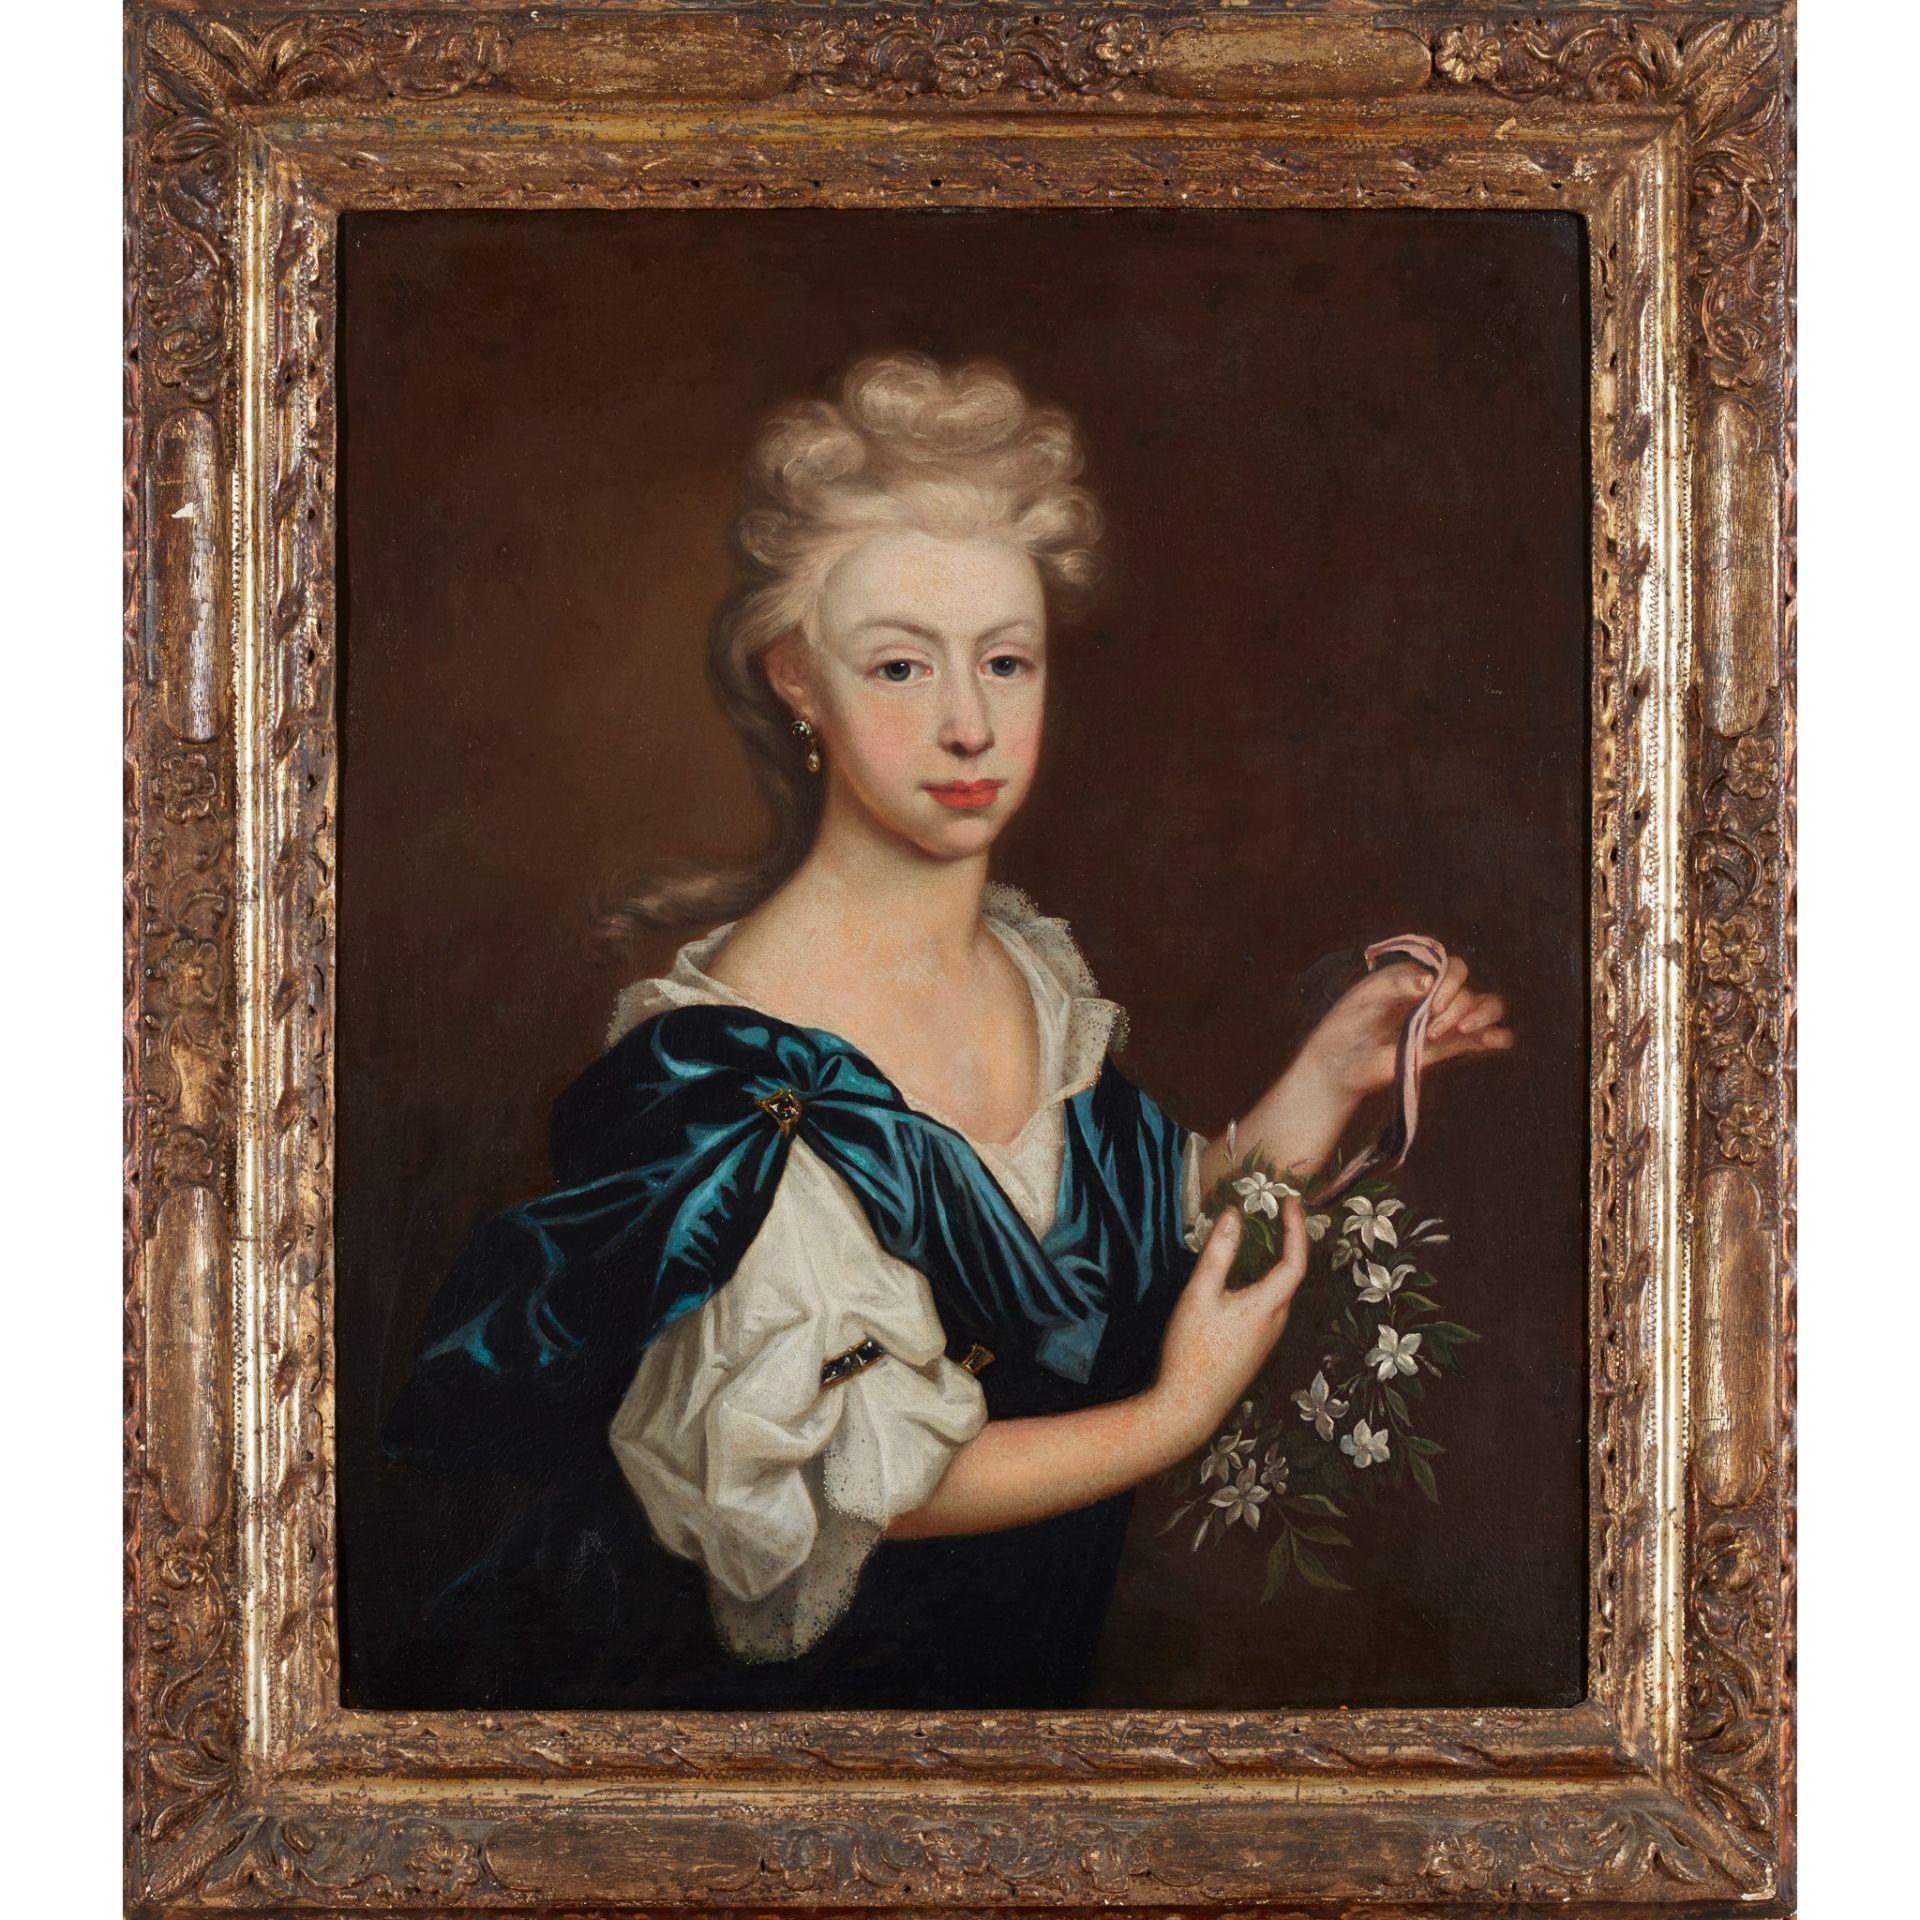 17TH CENTURY ENGLISH SCHOOL HALF LENGTH PORTRAIT OF A YOUNG WOMAN HOLDING A GARLAND OF FLOWERS - Image 2 of 2